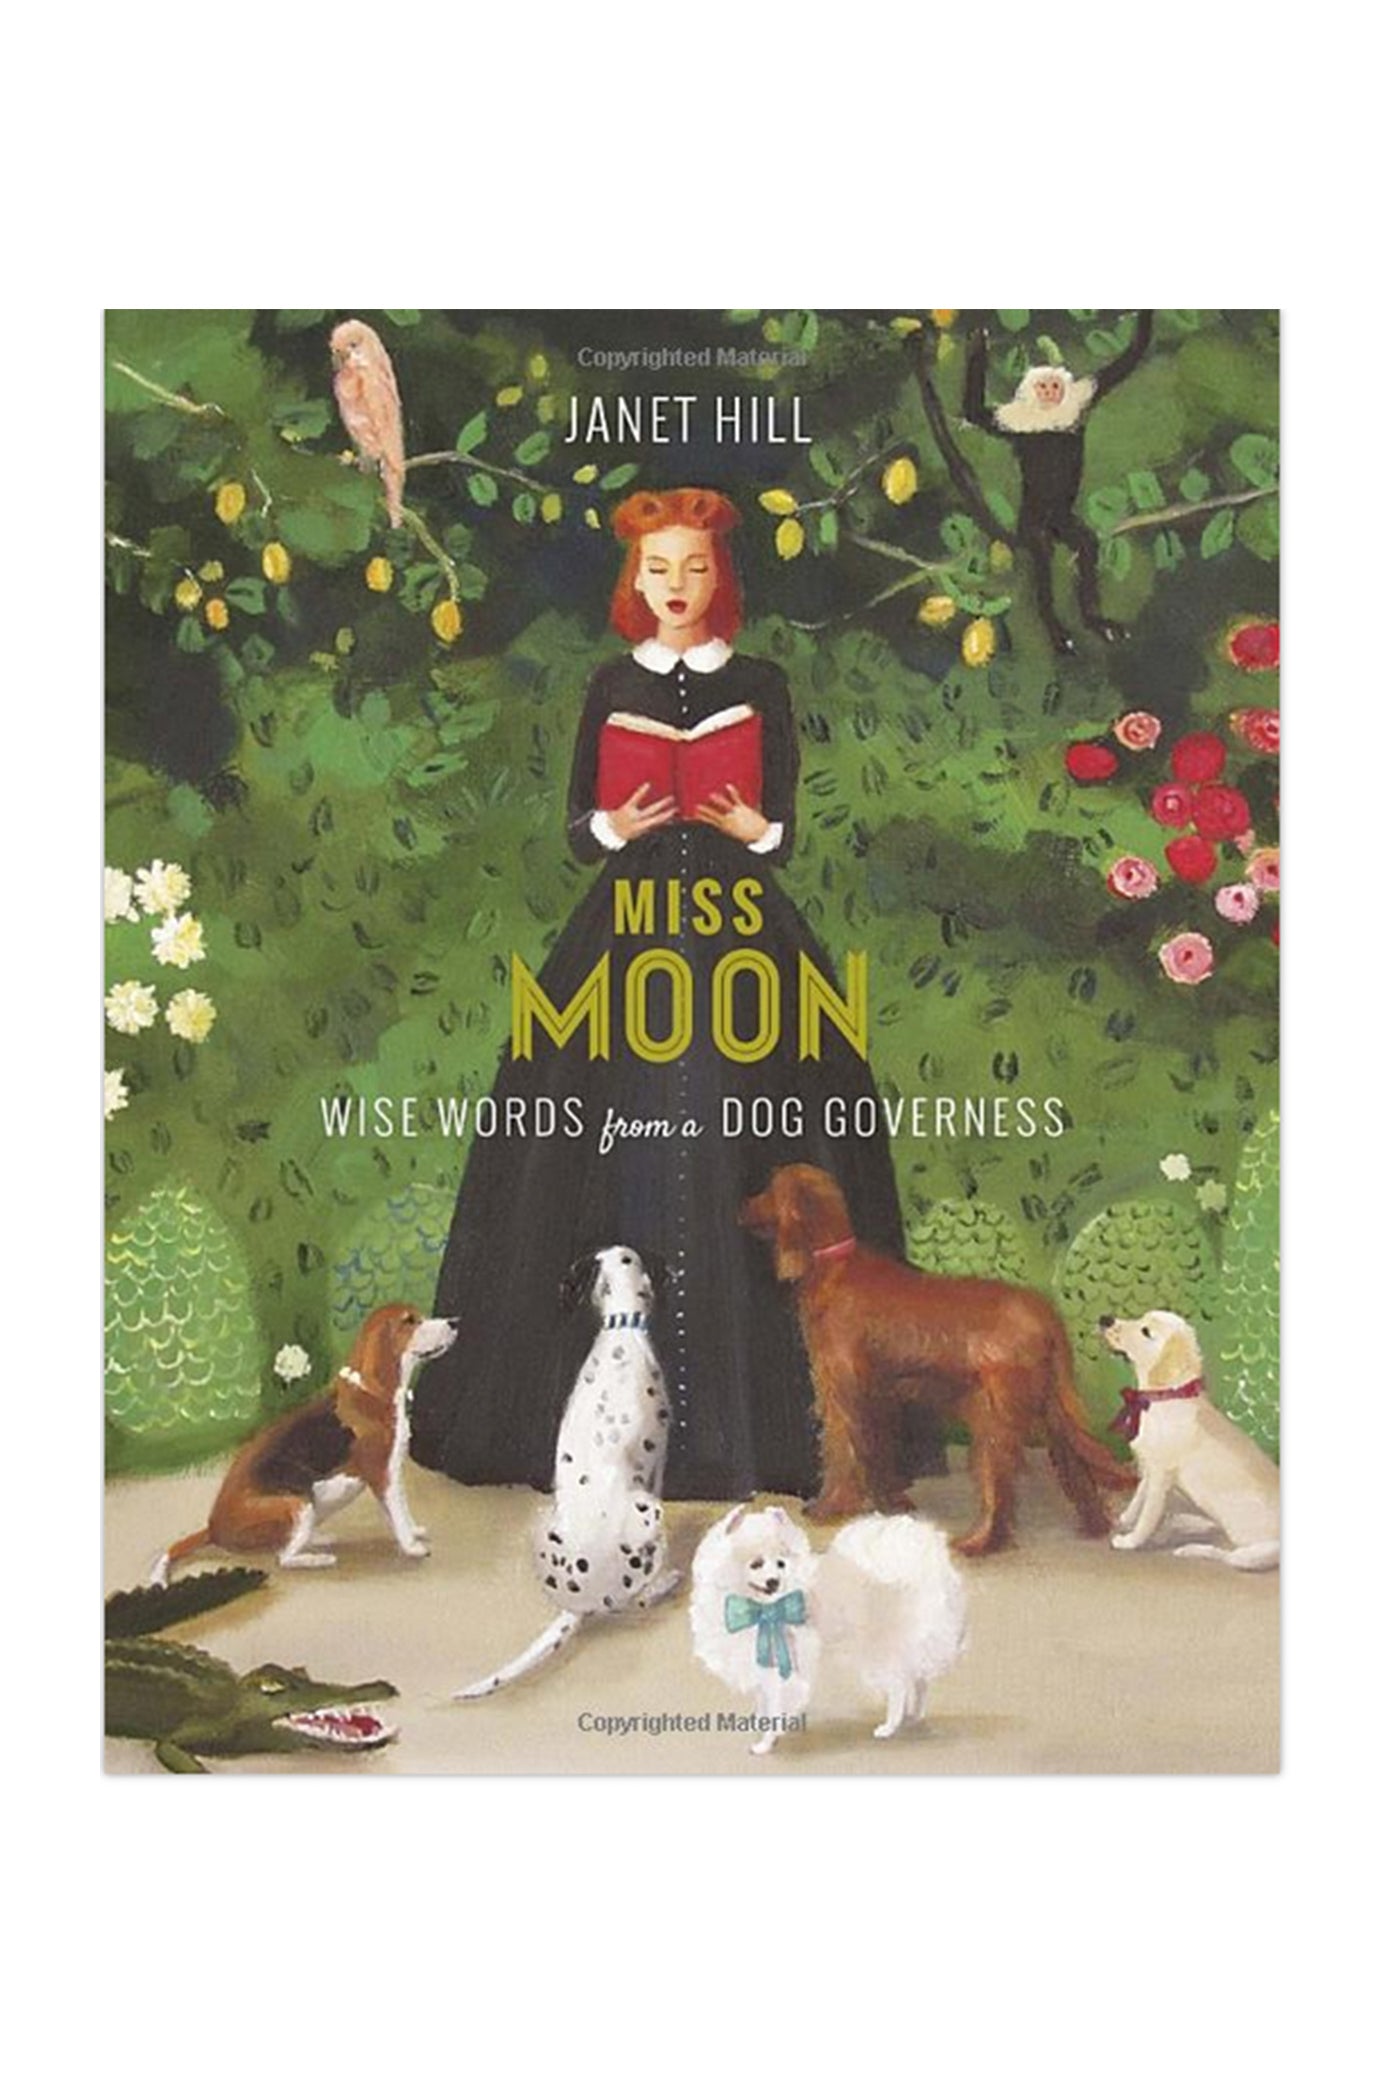 Miss Moon: Wise Words from a Dog Governess Hardcover Book